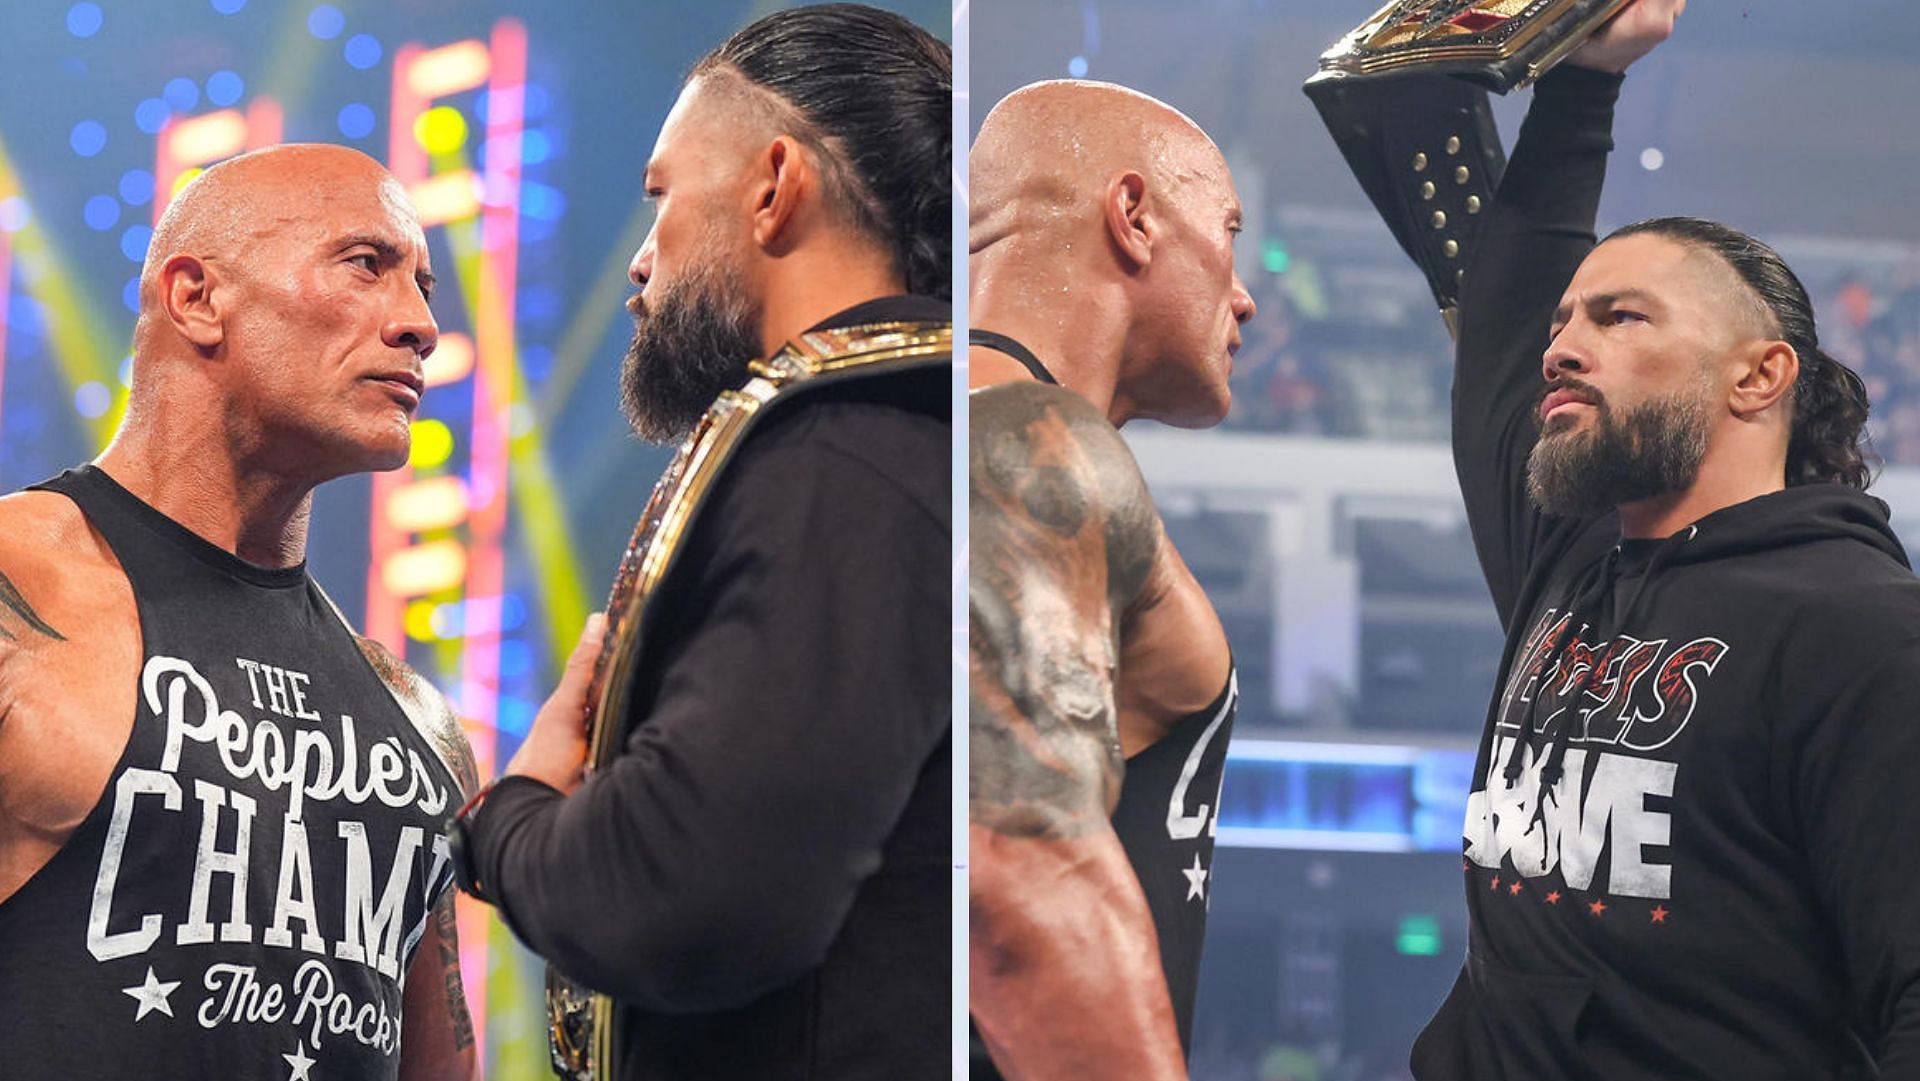 The Rock had name-dropped Roman Reigns at WWE Day 1.